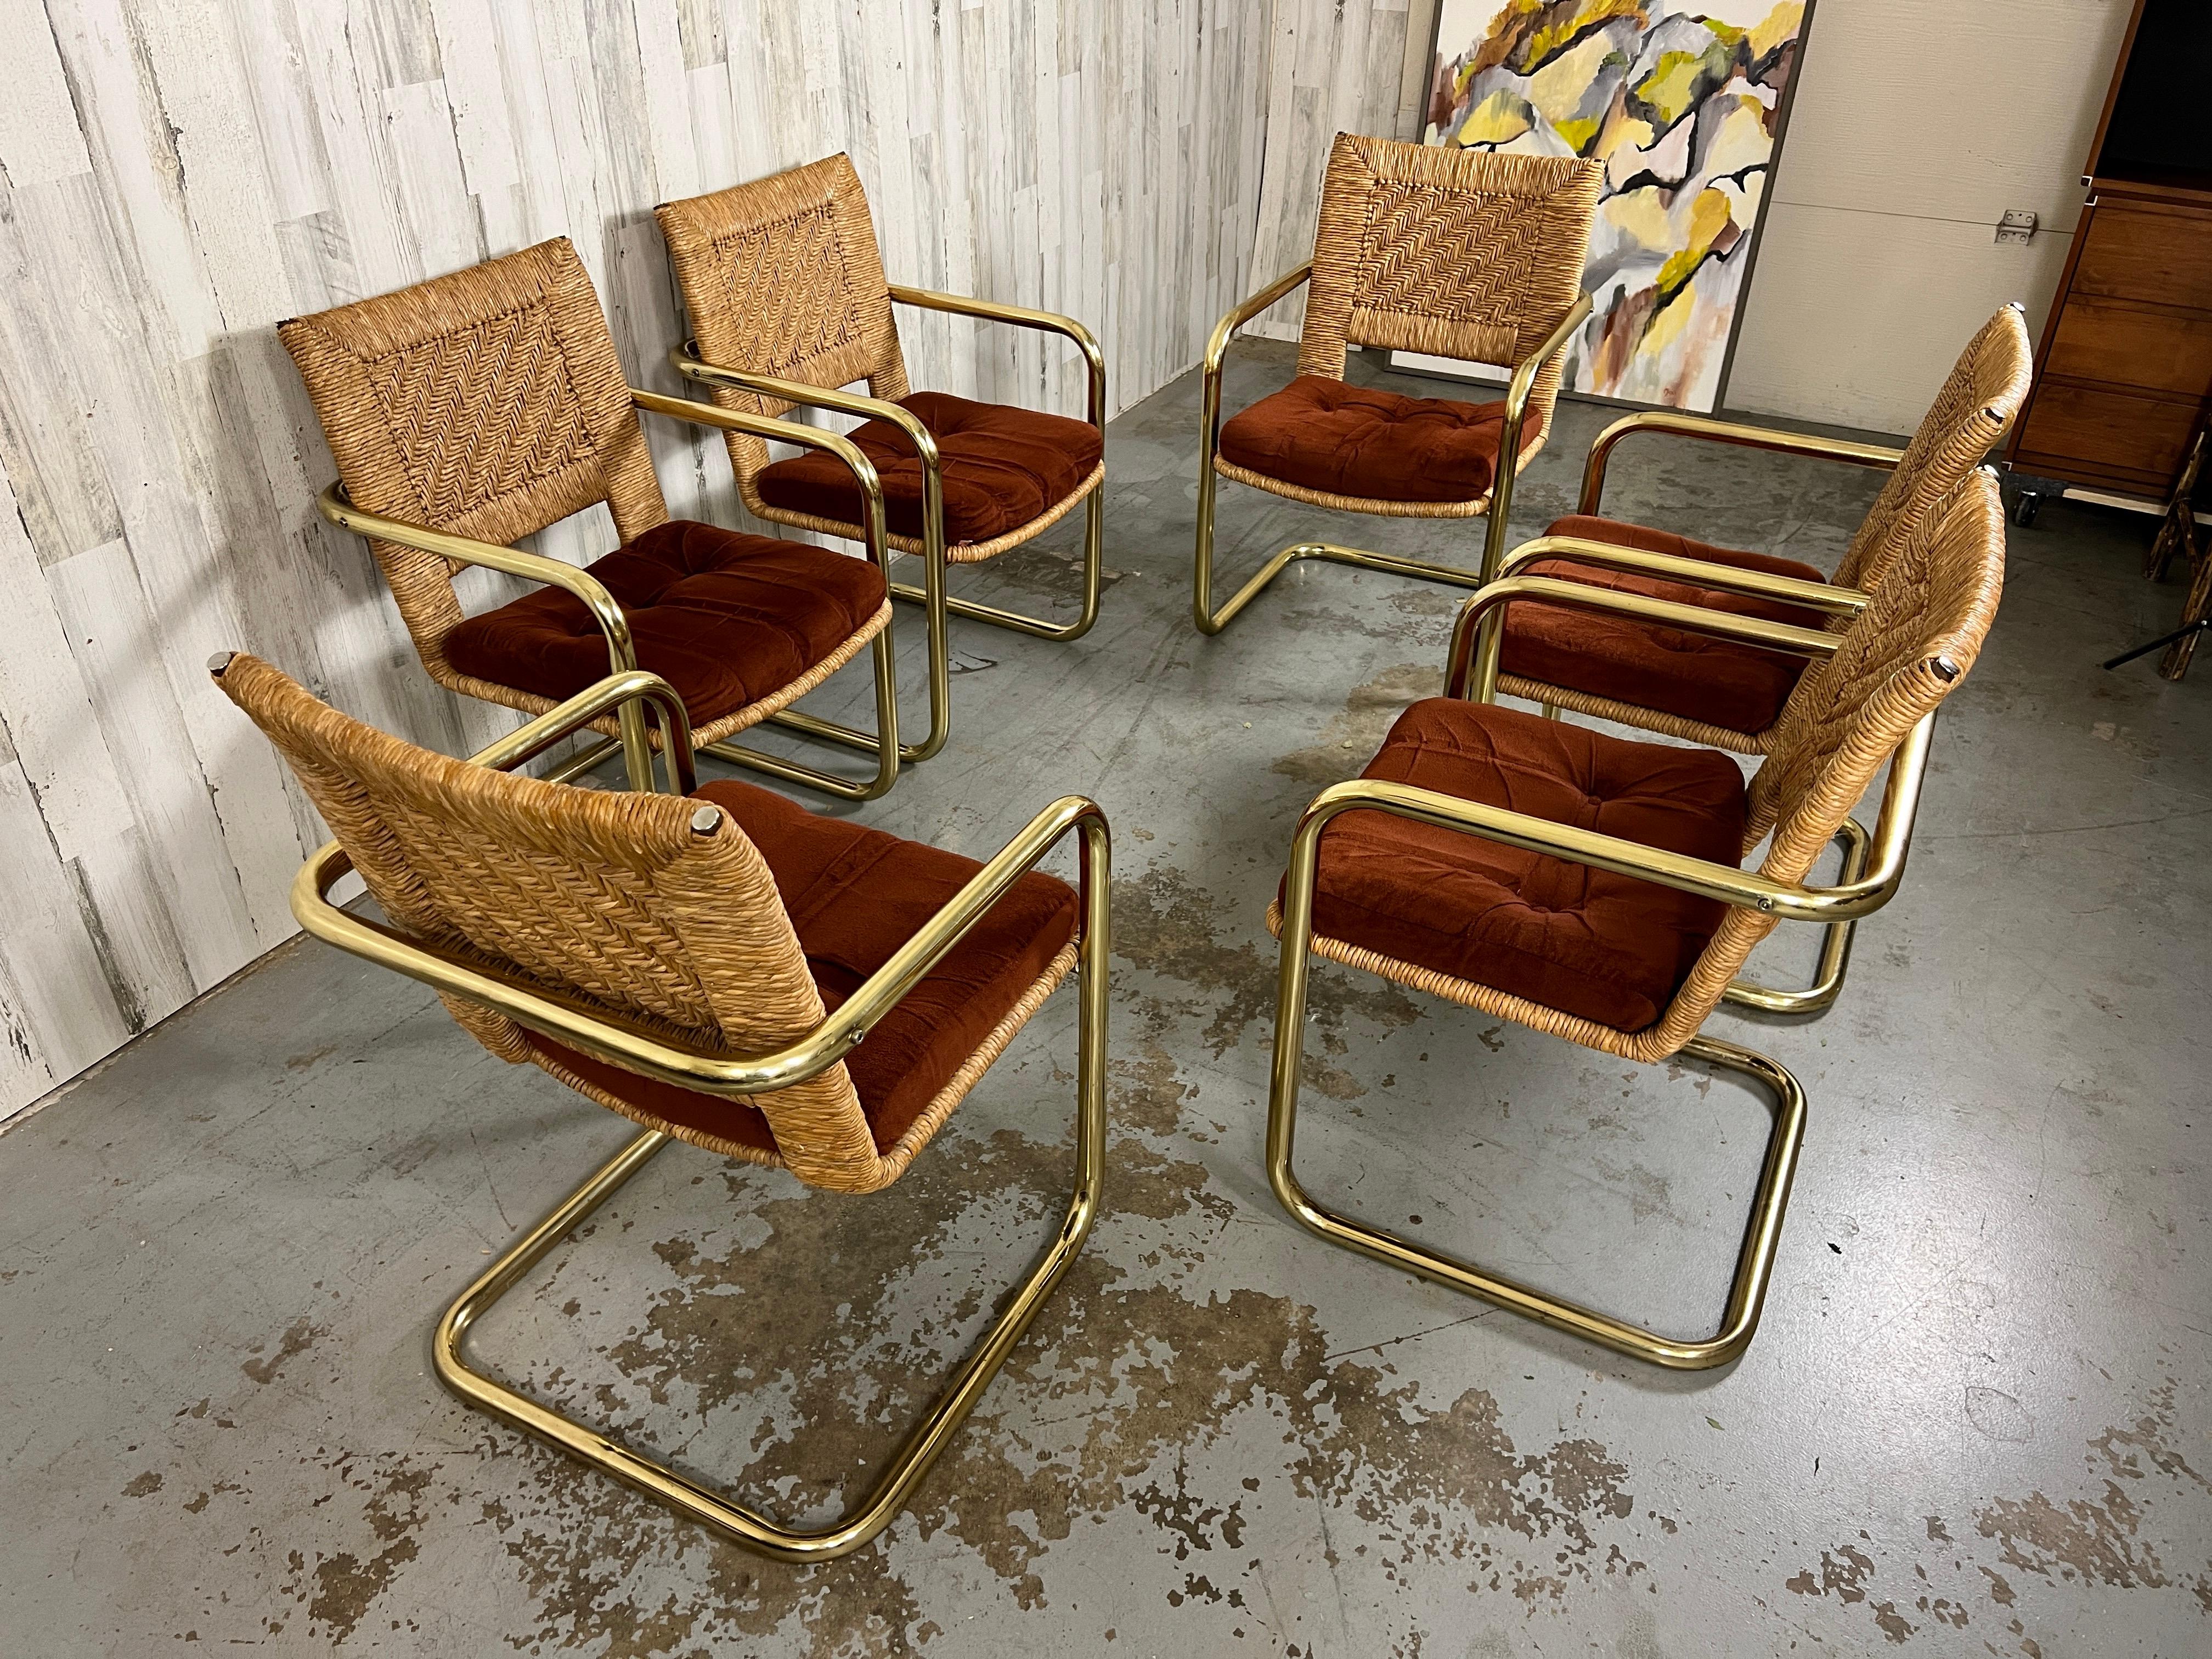 Set of 6 Cantilevered dining chairs with woven rush backs and upholstery covered seats by Chrome craft.
The rush back is woven in a geometric design that compliments the brass tube frame. The rush on the seat is only around the boarder of the